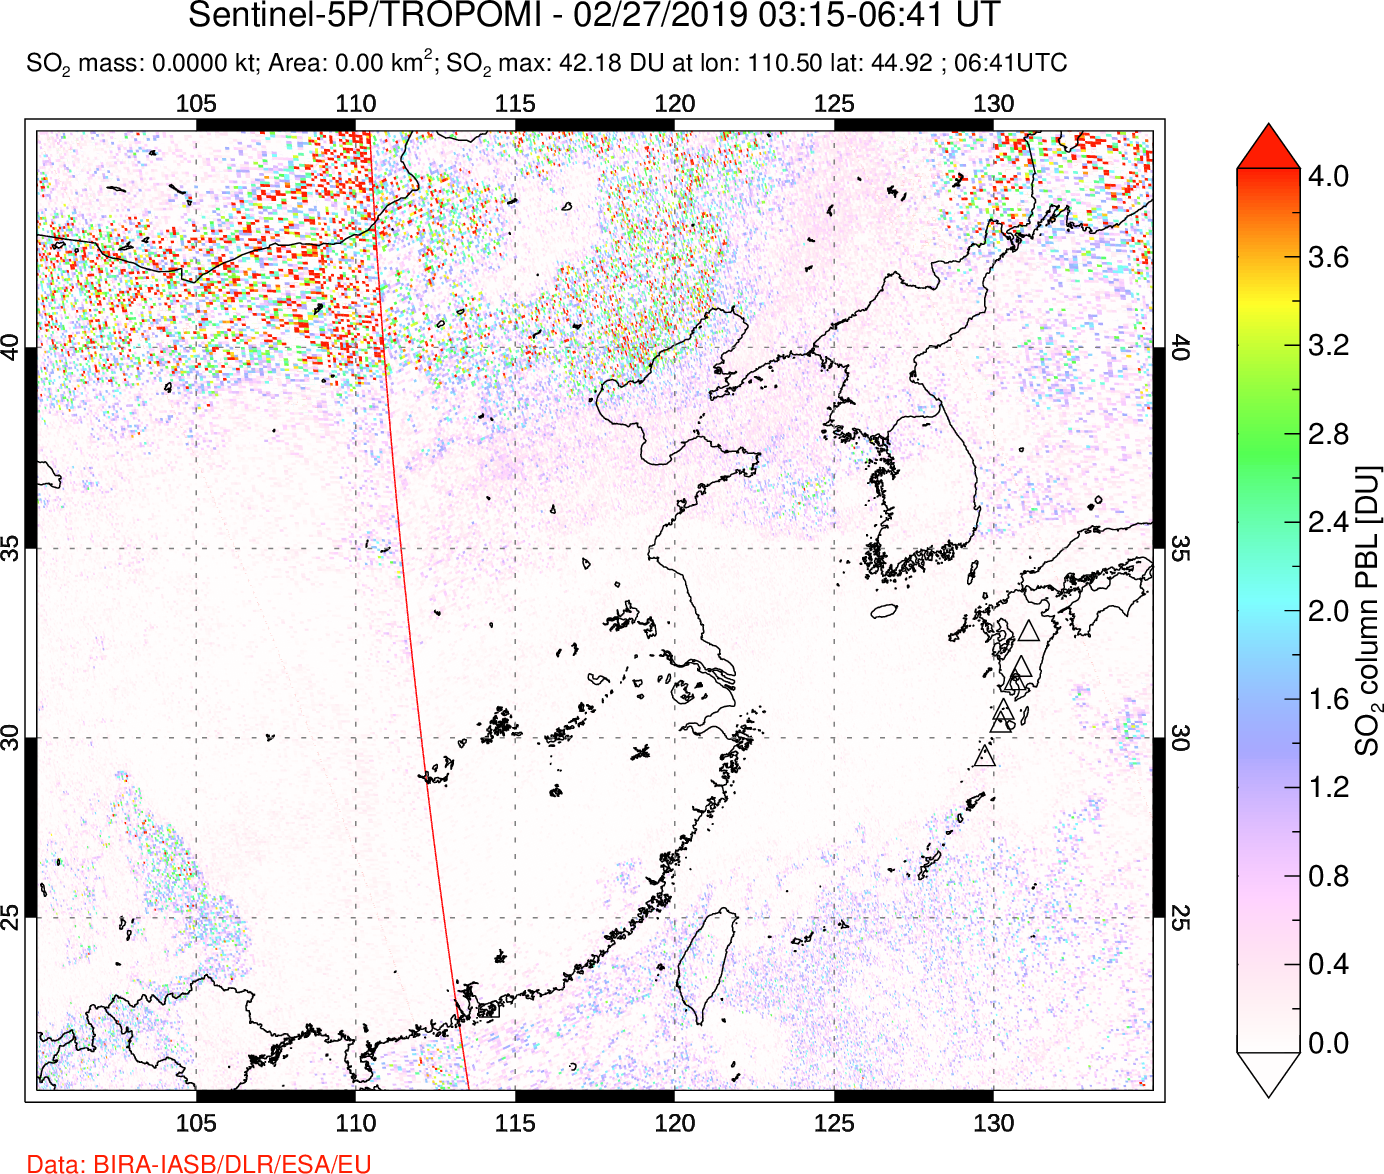 A sulfur dioxide image over Eastern China on Feb 27, 2019.